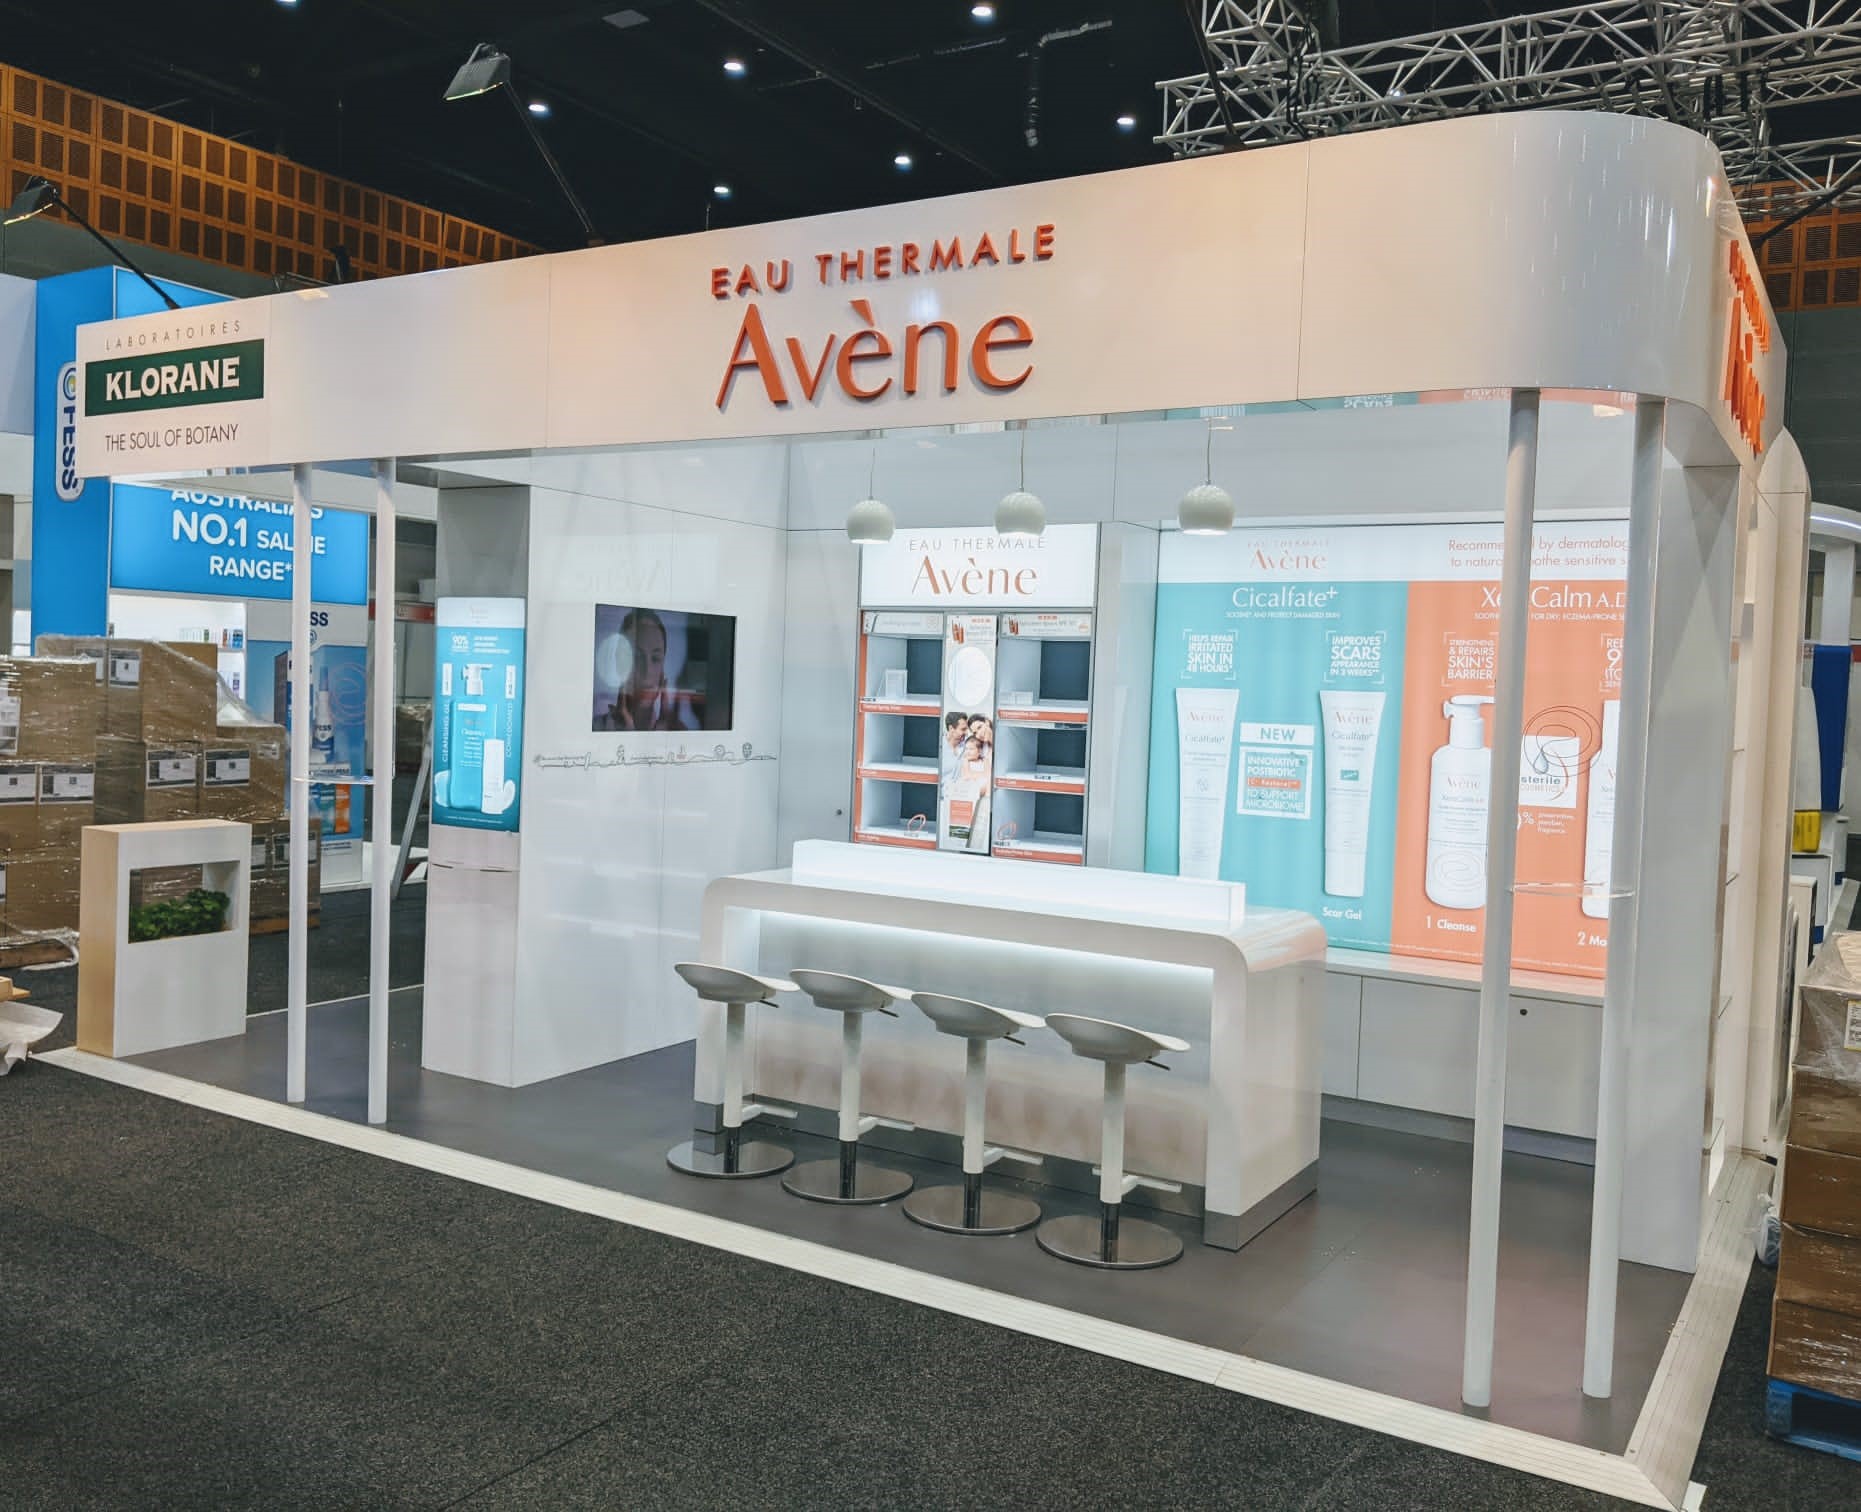 Avene expo stand empty with signage and a table with stools